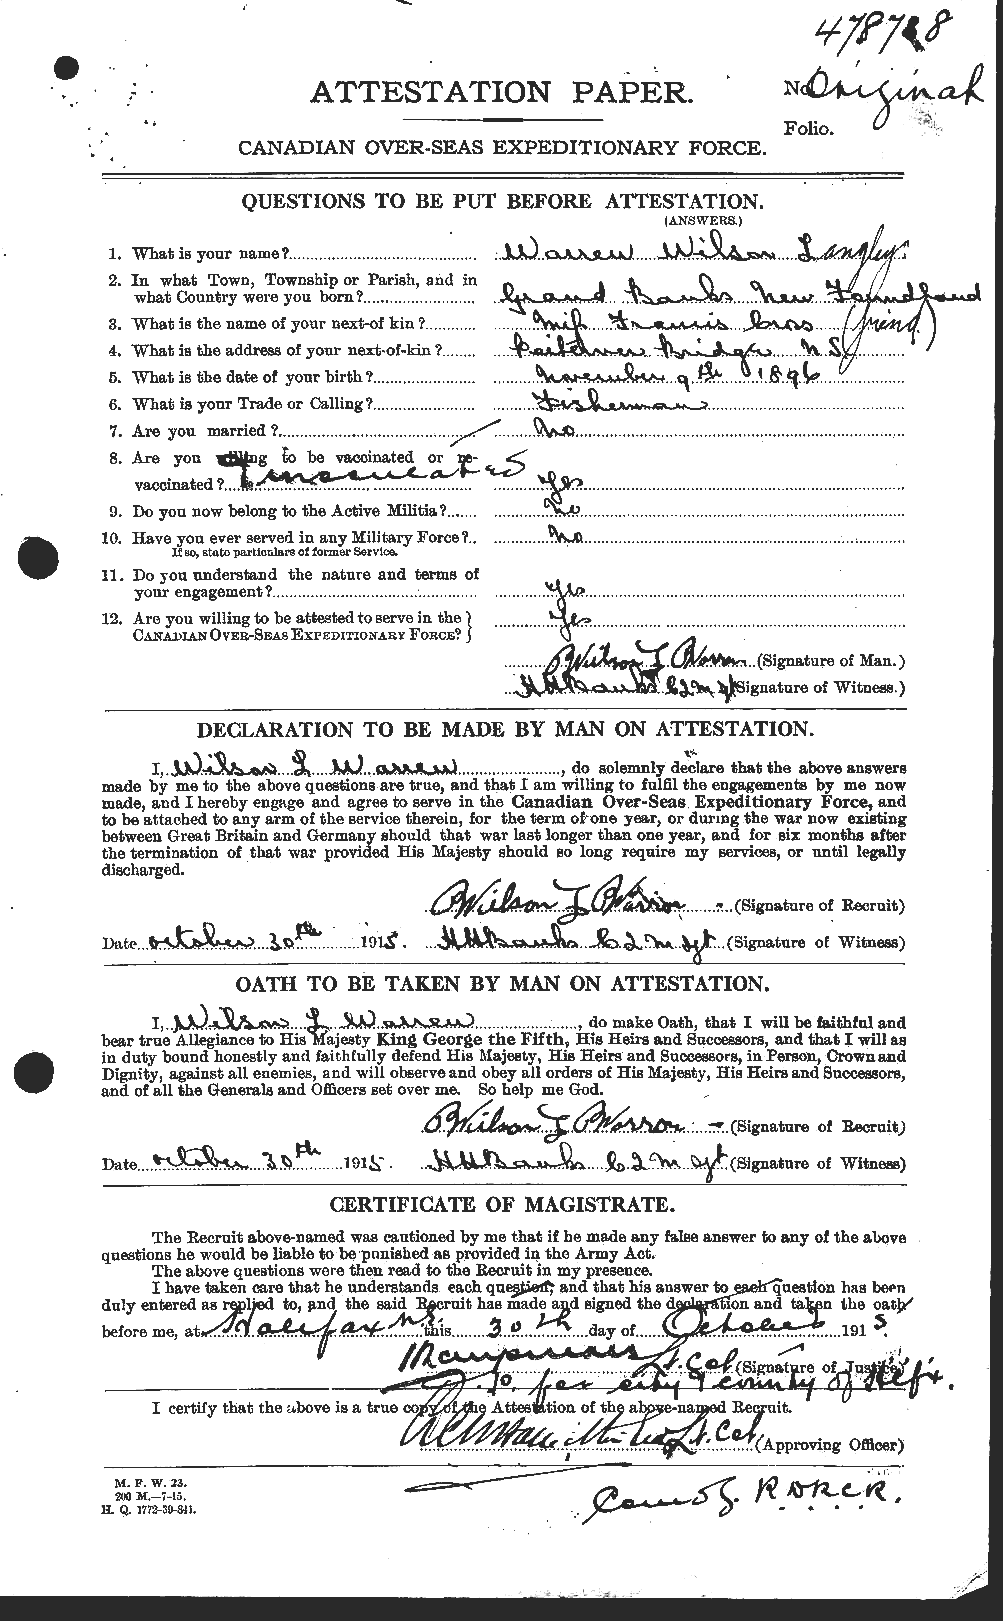 Personnel Records of the First World War - CEF 658697a